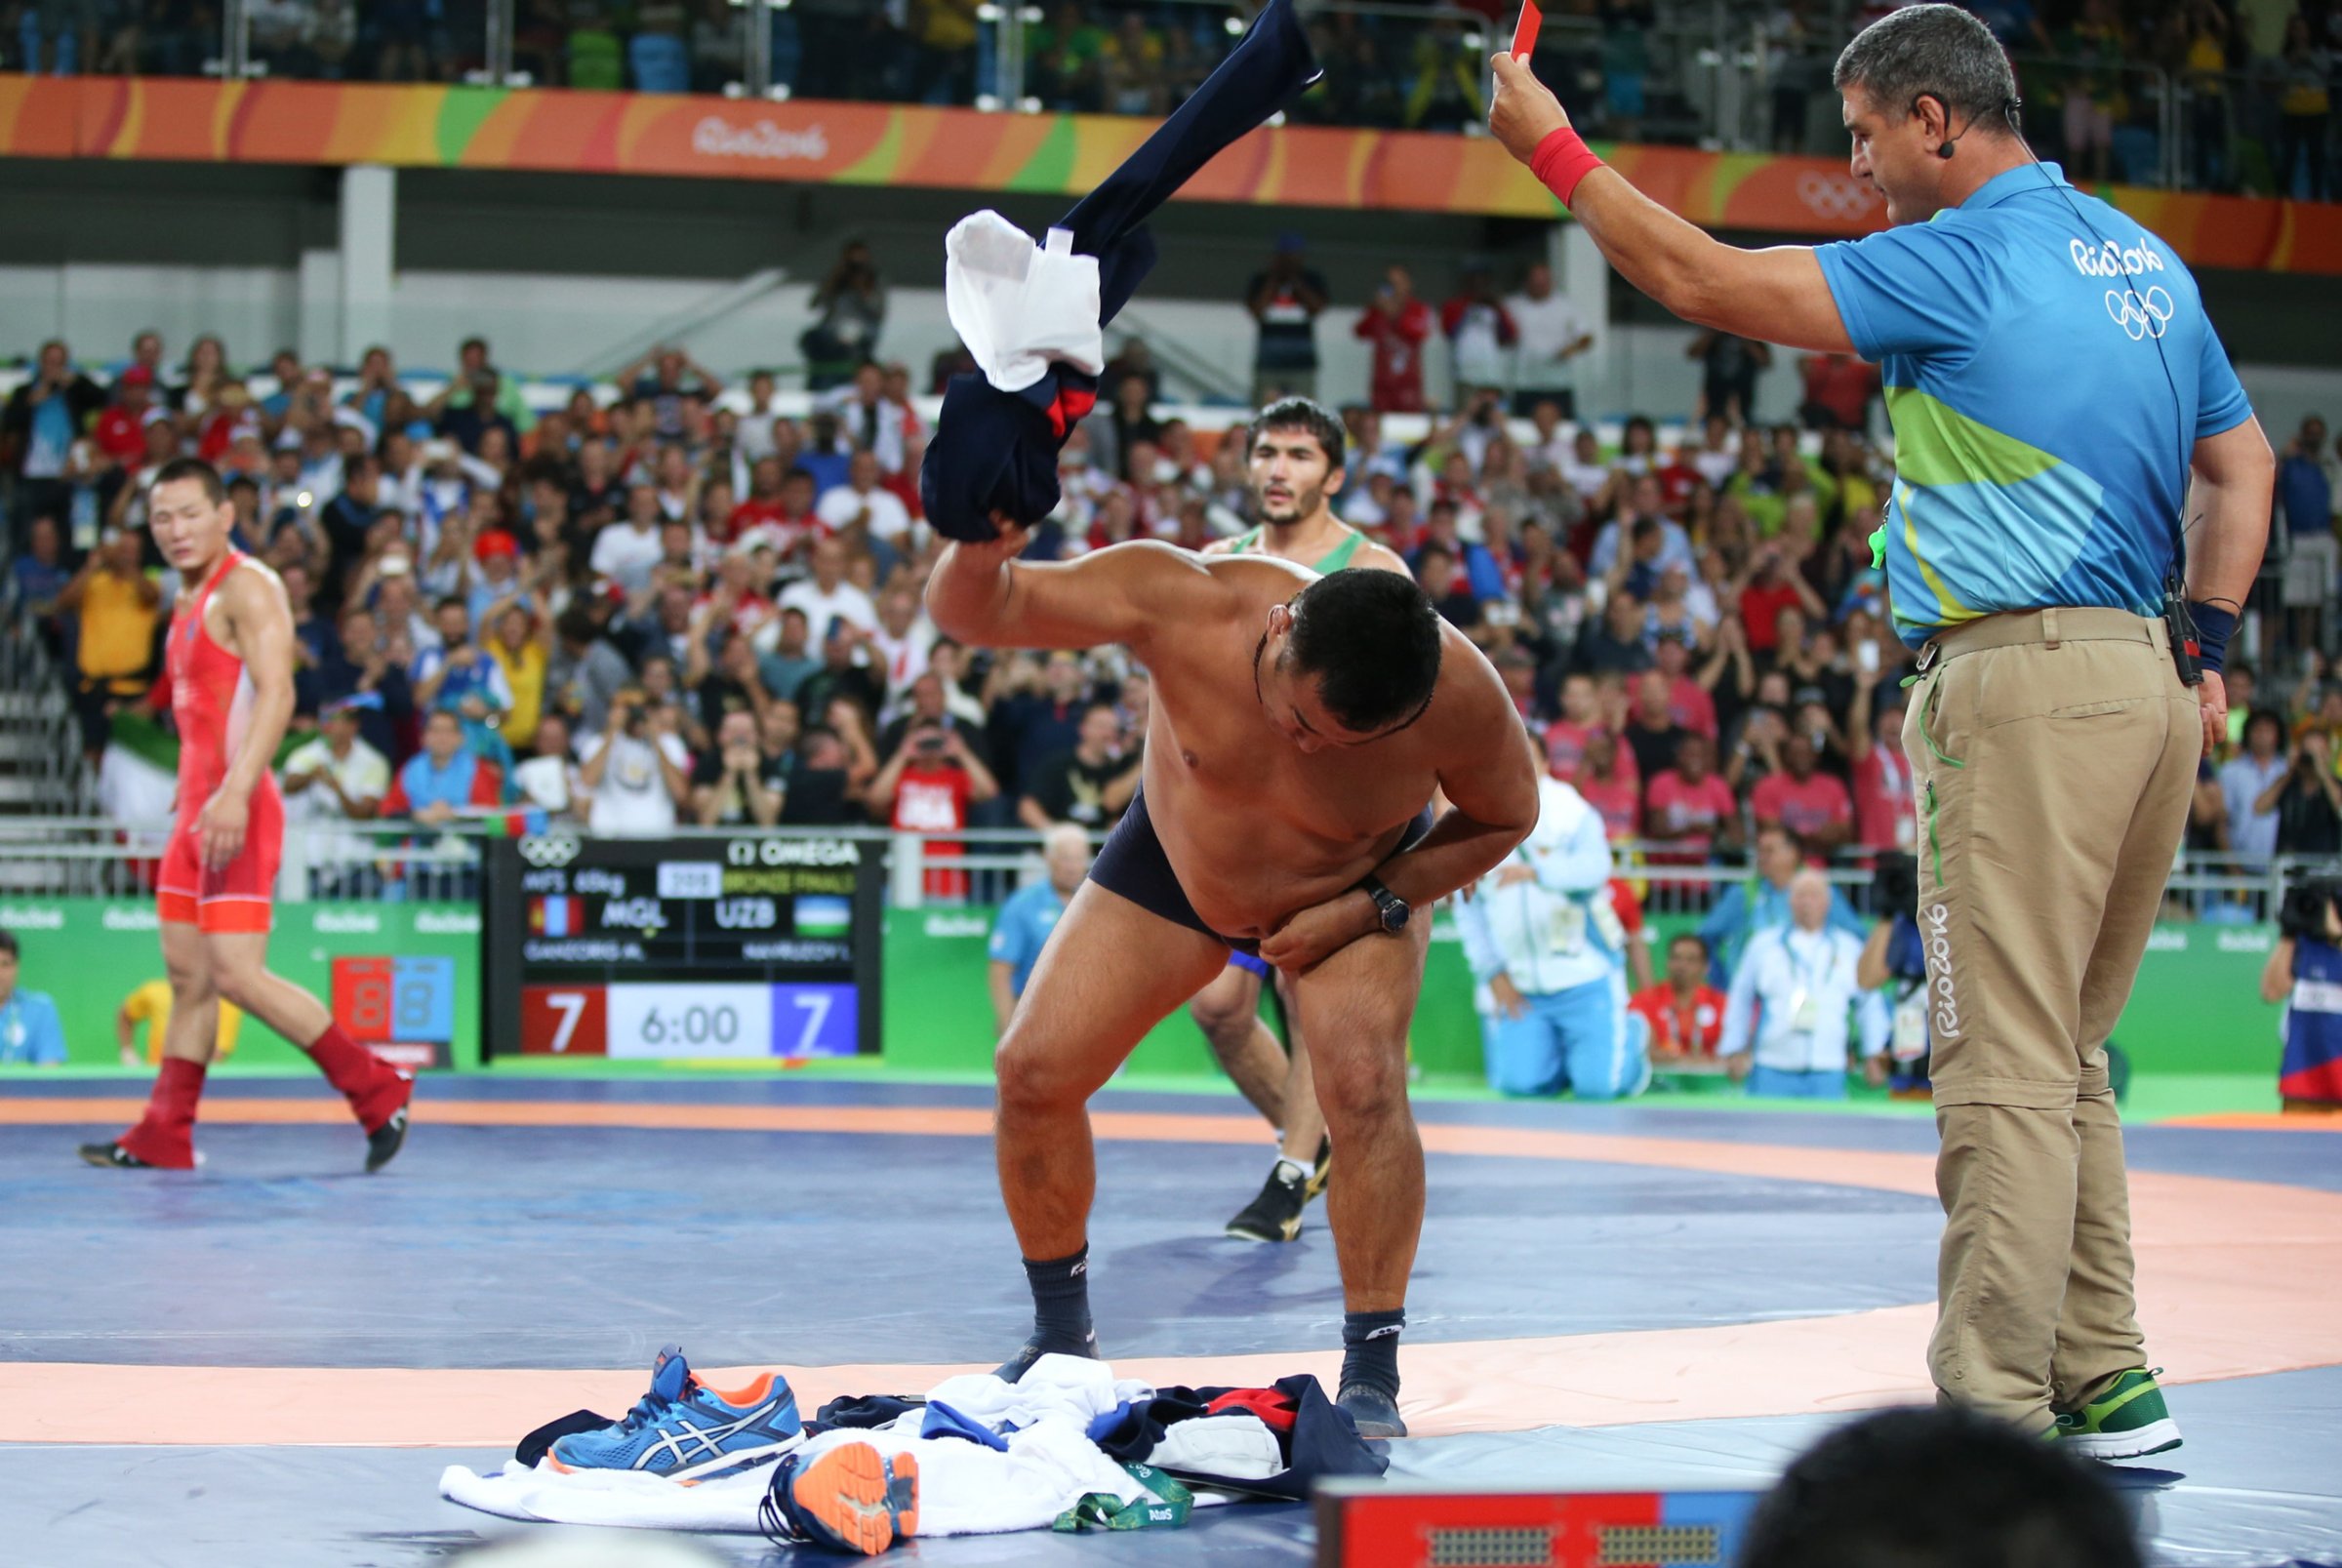 2016 Rio Olympics - Wrestling - Final - Men's Freestyle 65 kg Bronze - Carioca Arena 2 - Rio de Janeiro, Brazil - 21/08/2016. The coach of Mandakhnaran Ganzorig (MGL) of Mongolia takes off his clothes as he protests after the match against Ikhtiyor Navruzov (UZB) of Uzbekistan. REUTERS/Toru Hanai TPX IMAGES OF THE DAY. FOR EDITORIAL USE ONLY. NOT FOR SALE FOR MARKETING OR ADVERTISING CAMPAIGNS. - RTX2MFJ3